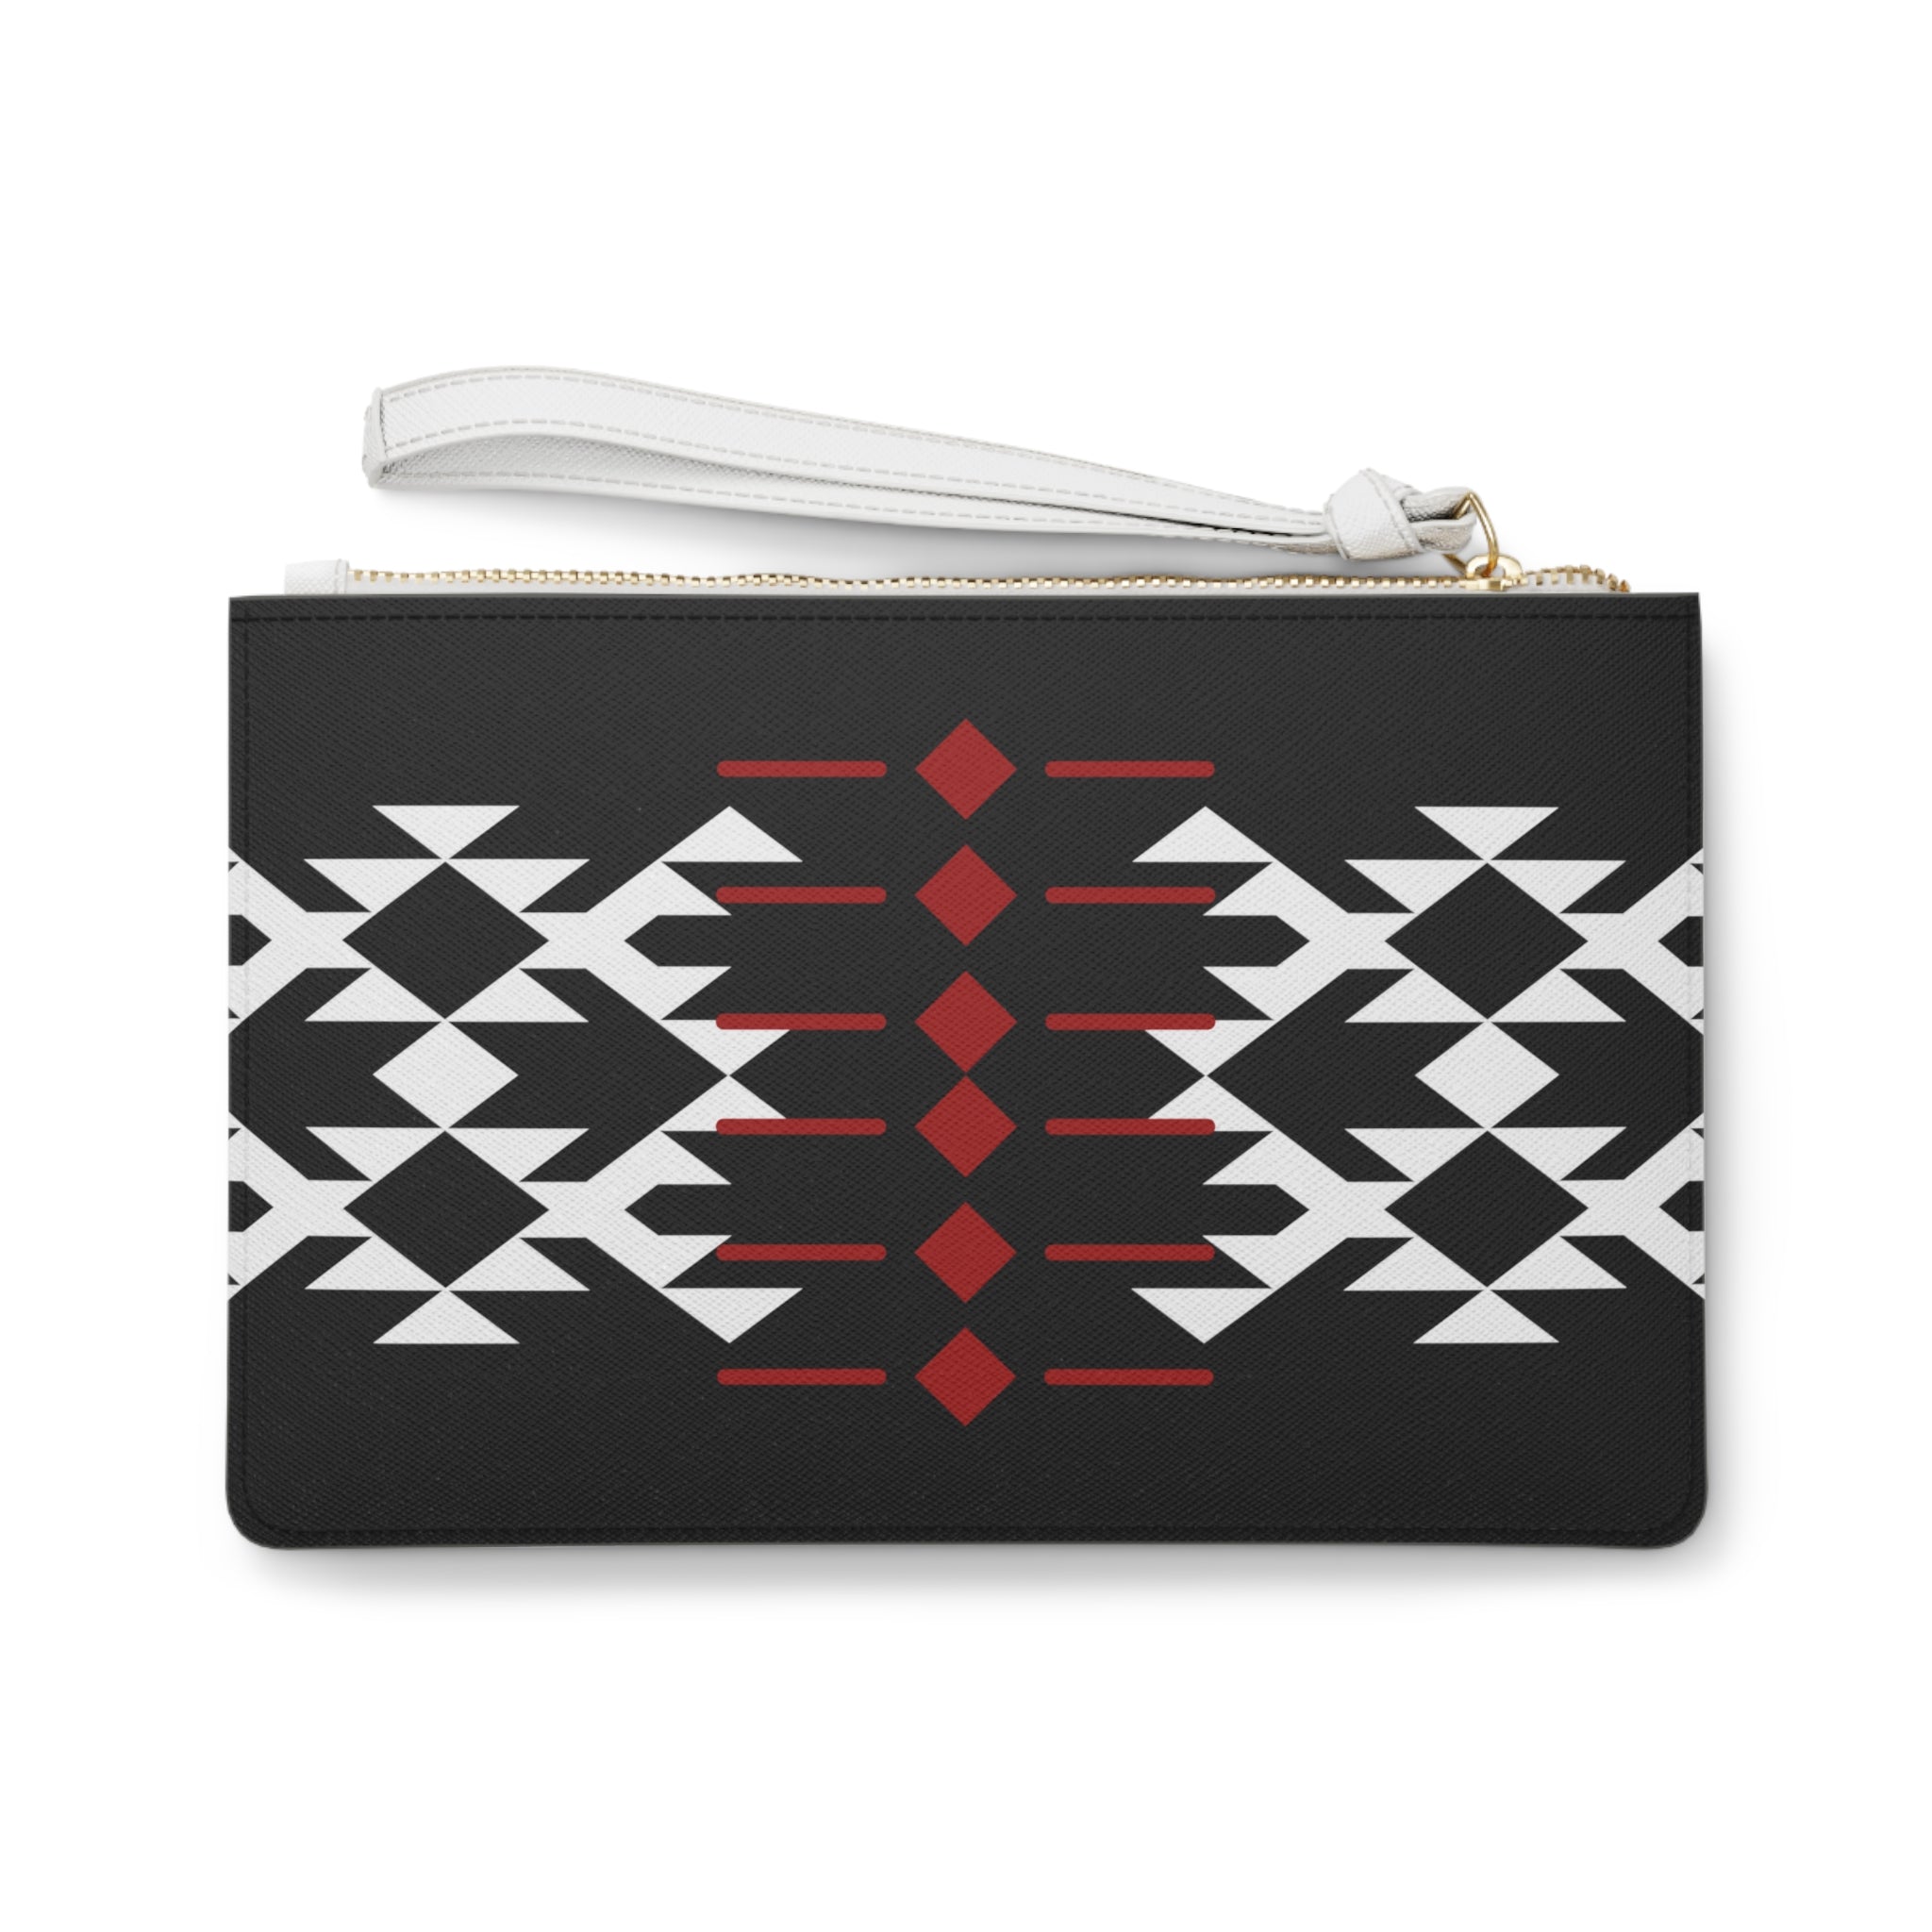 Black, Red, and White Warrior Clutch